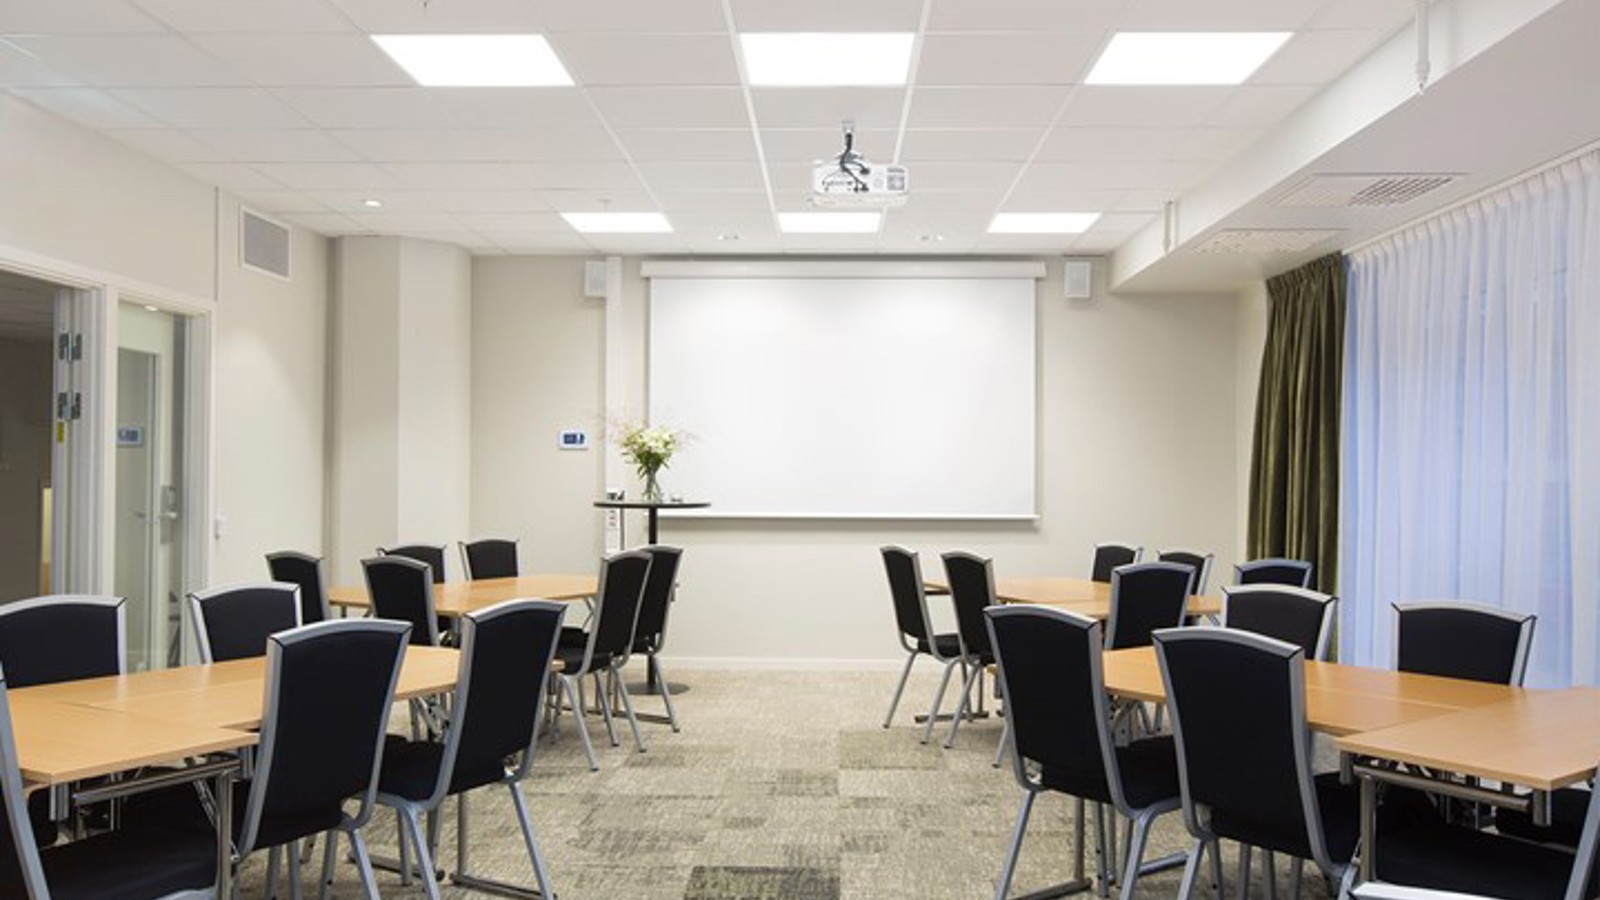 Conference room with island seating, white walls, black chairs, wooden table